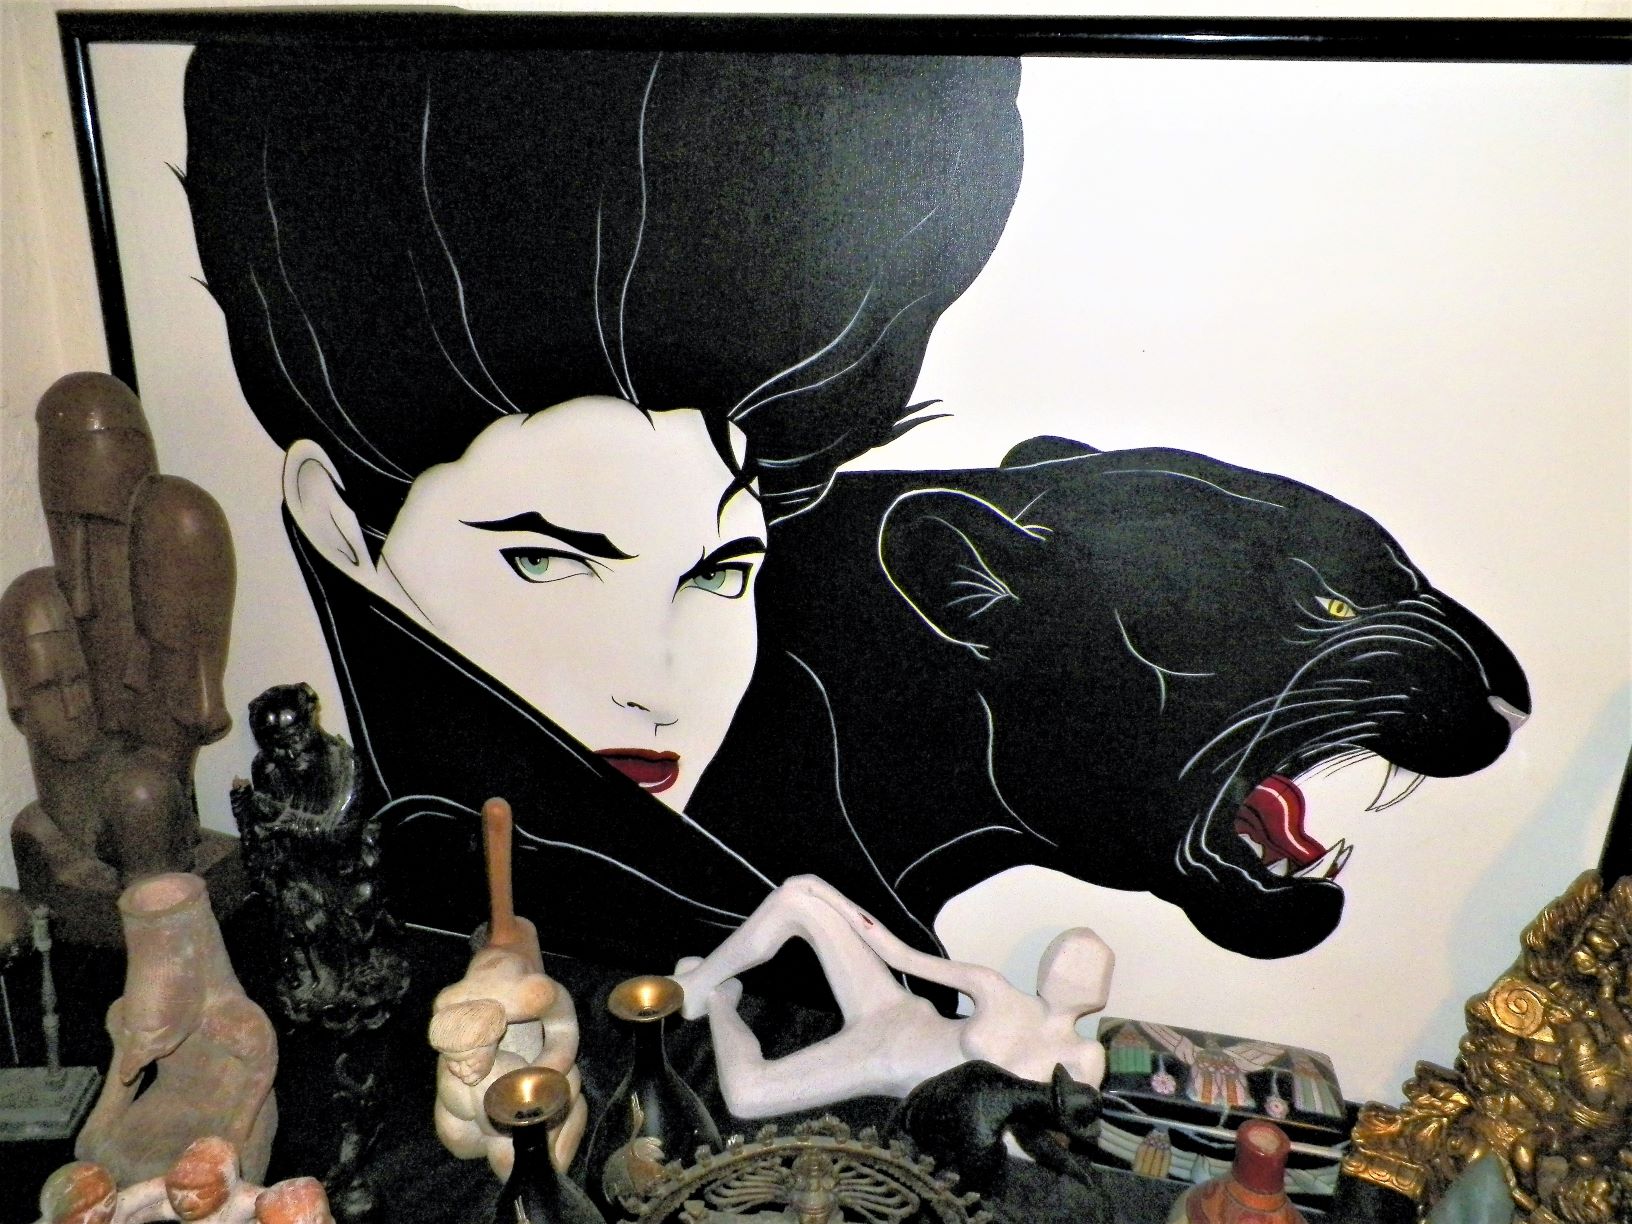 ART PAINTING NAGEL PAINTING LARGE UNSIGNED 2AA.JPG